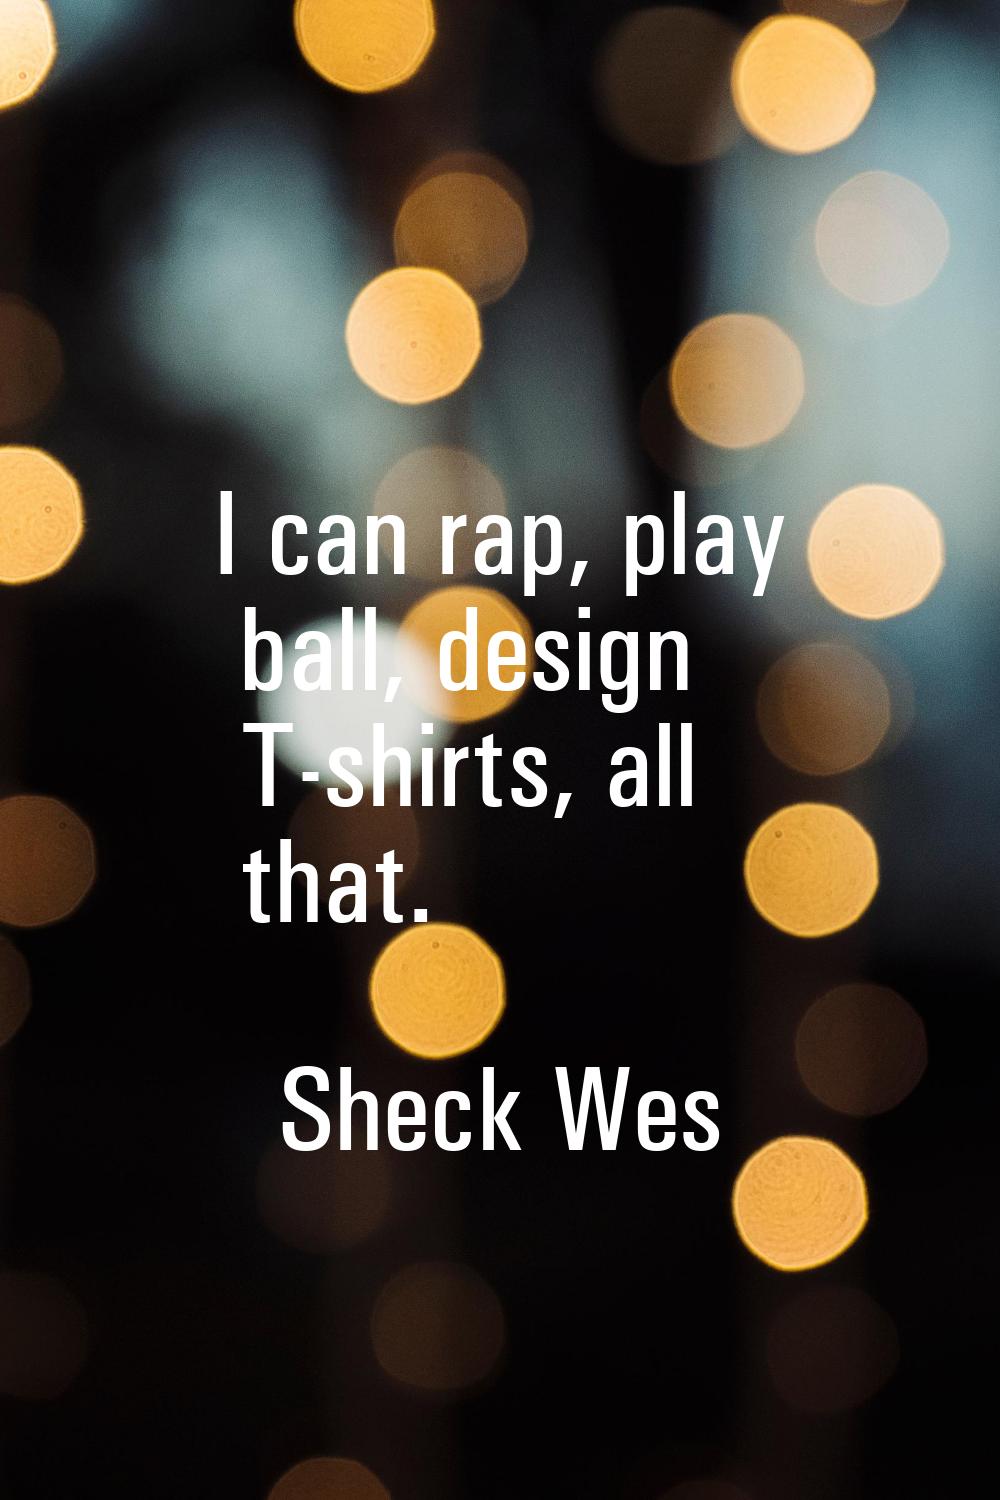 I can rap, play ball, design T-shirts, all that.